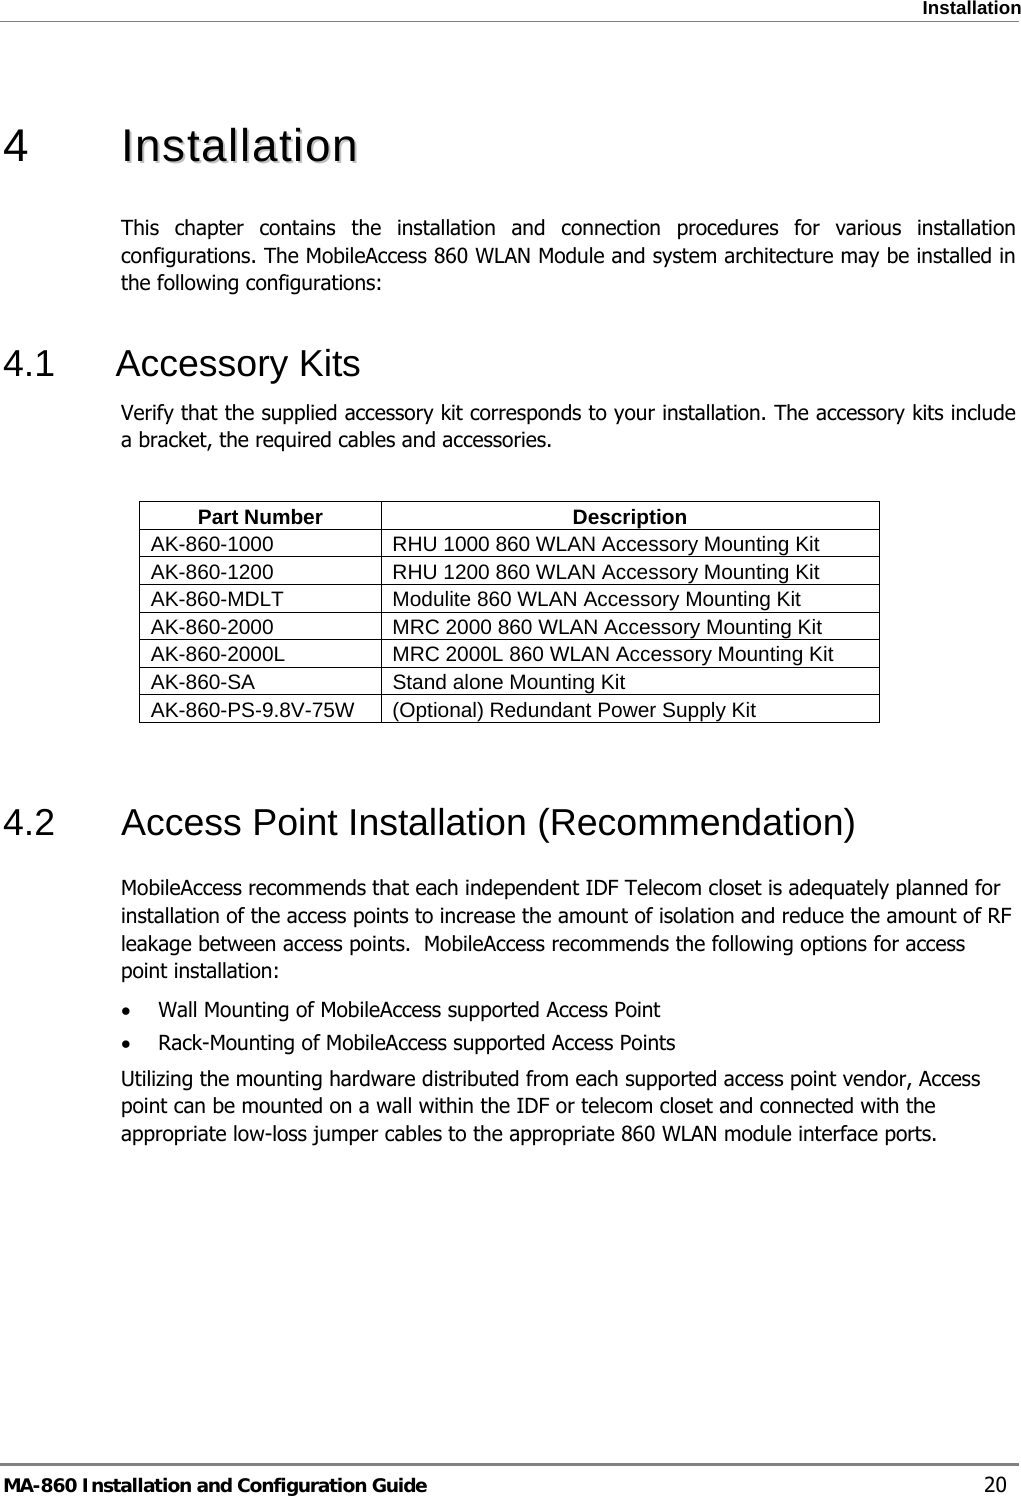  Installation  4   IInnssttaallllaattiioonn    This chapter contains the installation and connection procedures for various installation configurations. The MobileAccess 860 WLAN Module and system architecture may be installed in the following configurations: 4.1 Accessory Kits Verify that the supplied accessory kit corresponds to your installation. The accessory kits include a bracket, the required cables and accessories.  Part Number  Description AK-860-1000  RHU 1000 860 WLAN Accessory Mounting Kit  AK-860-1200  RHU 1200 860 WLAN Accessory Mounting Kit  AK-860-MDLT  Modulite 860 WLAN Accessory Mounting Kit  AK-860-2000  MRC 2000 860 WLAN Accessory Mounting Kit  AK-860-2000L  MRC 2000L 860 WLAN Accessory Mounting Kit AK-860-SA  Stand alone Mounting Kit  AK-860-PS-9.8V-75W  (Optional) Redundant Power Supply Kit  4.2  Access Point Installation (Recommendation) MobileAccess recommends that each independent IDF Telecom closet is adequately planned for installation of the access points to increase the amount of isolation and reduce the amount of RF leakage between access points.  MobileAccess recommends the following options for access point installation: • Wall Mounting of MobileAccess supported Access Point • Rack-Mounting of MobileAccess supported Access Points Utilizing the mounting hardware distributed from each supported access point vendor, Access point can be mounted on a wall within the IDF or telecom closet and connected with the appropriate low-loss jumper cables to the appropriate 860 WLAN module interface ports. MA-860 Installation and Configuration Guide    20 